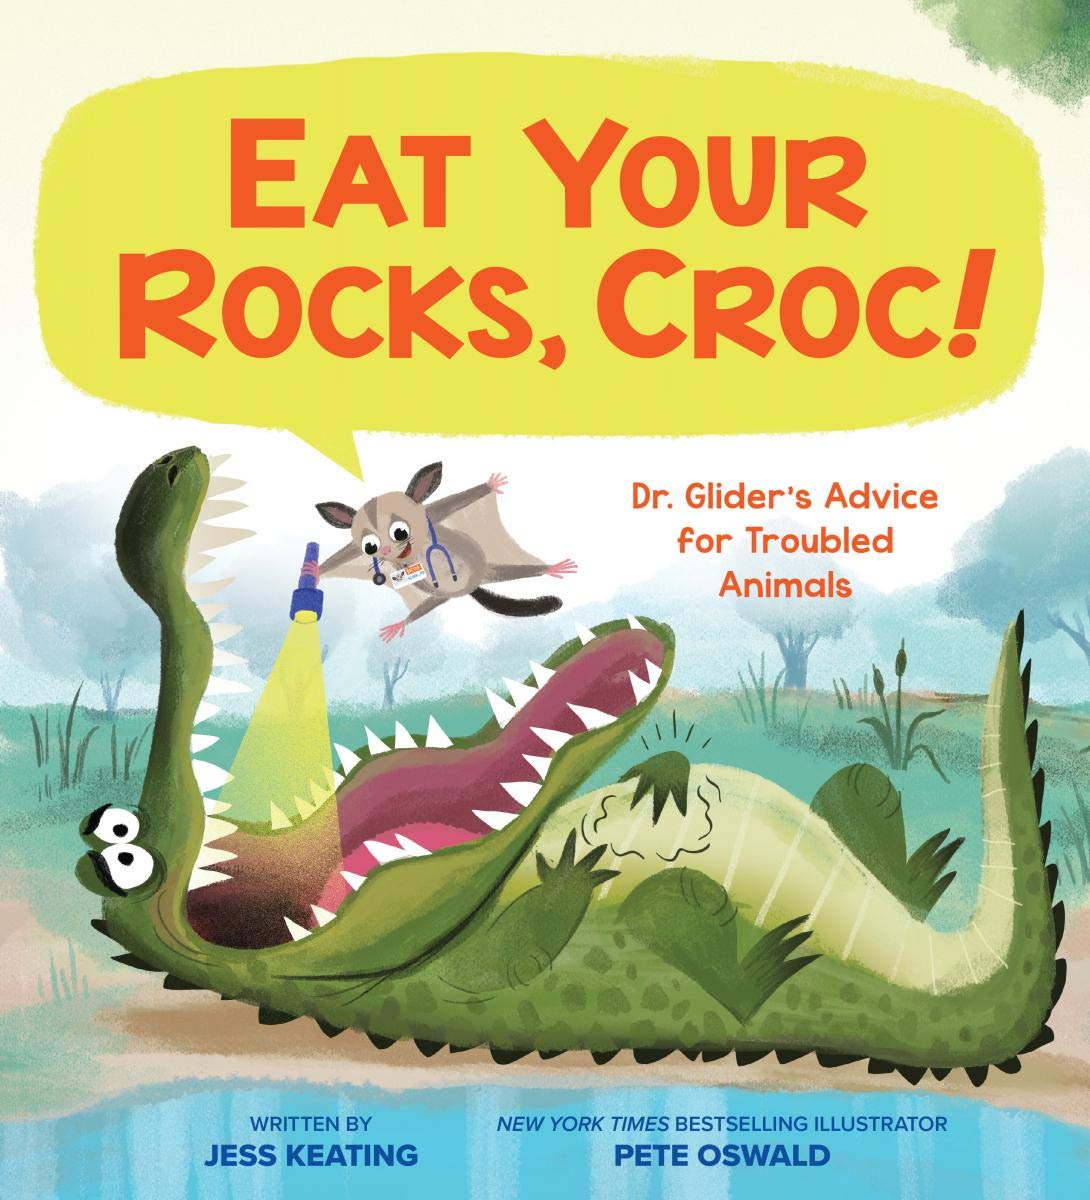 Eat Your Rocks, Croc!: Dr. Glider’s Advice for Troubled Animals